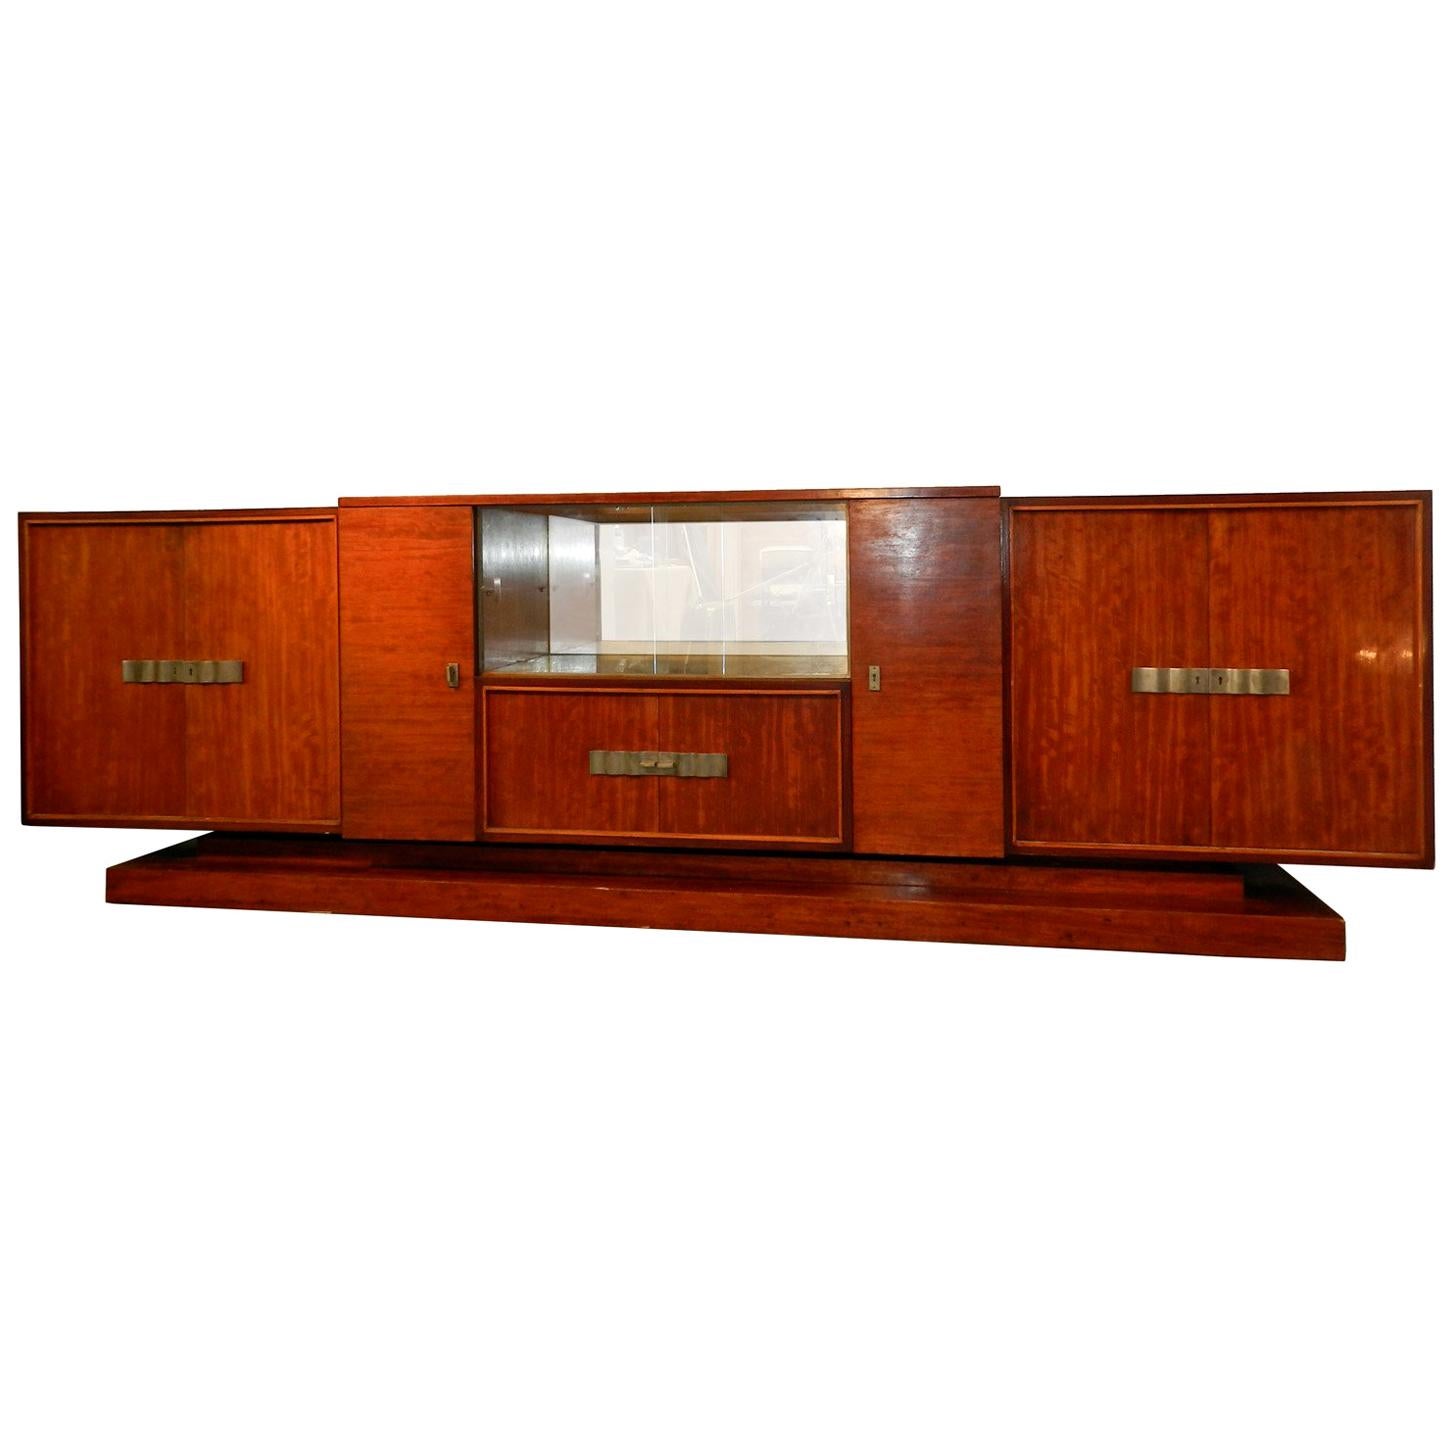 Decoene Freres, Large Art Deco Sideboard in MOVINGUI MOIRE , circa 1930